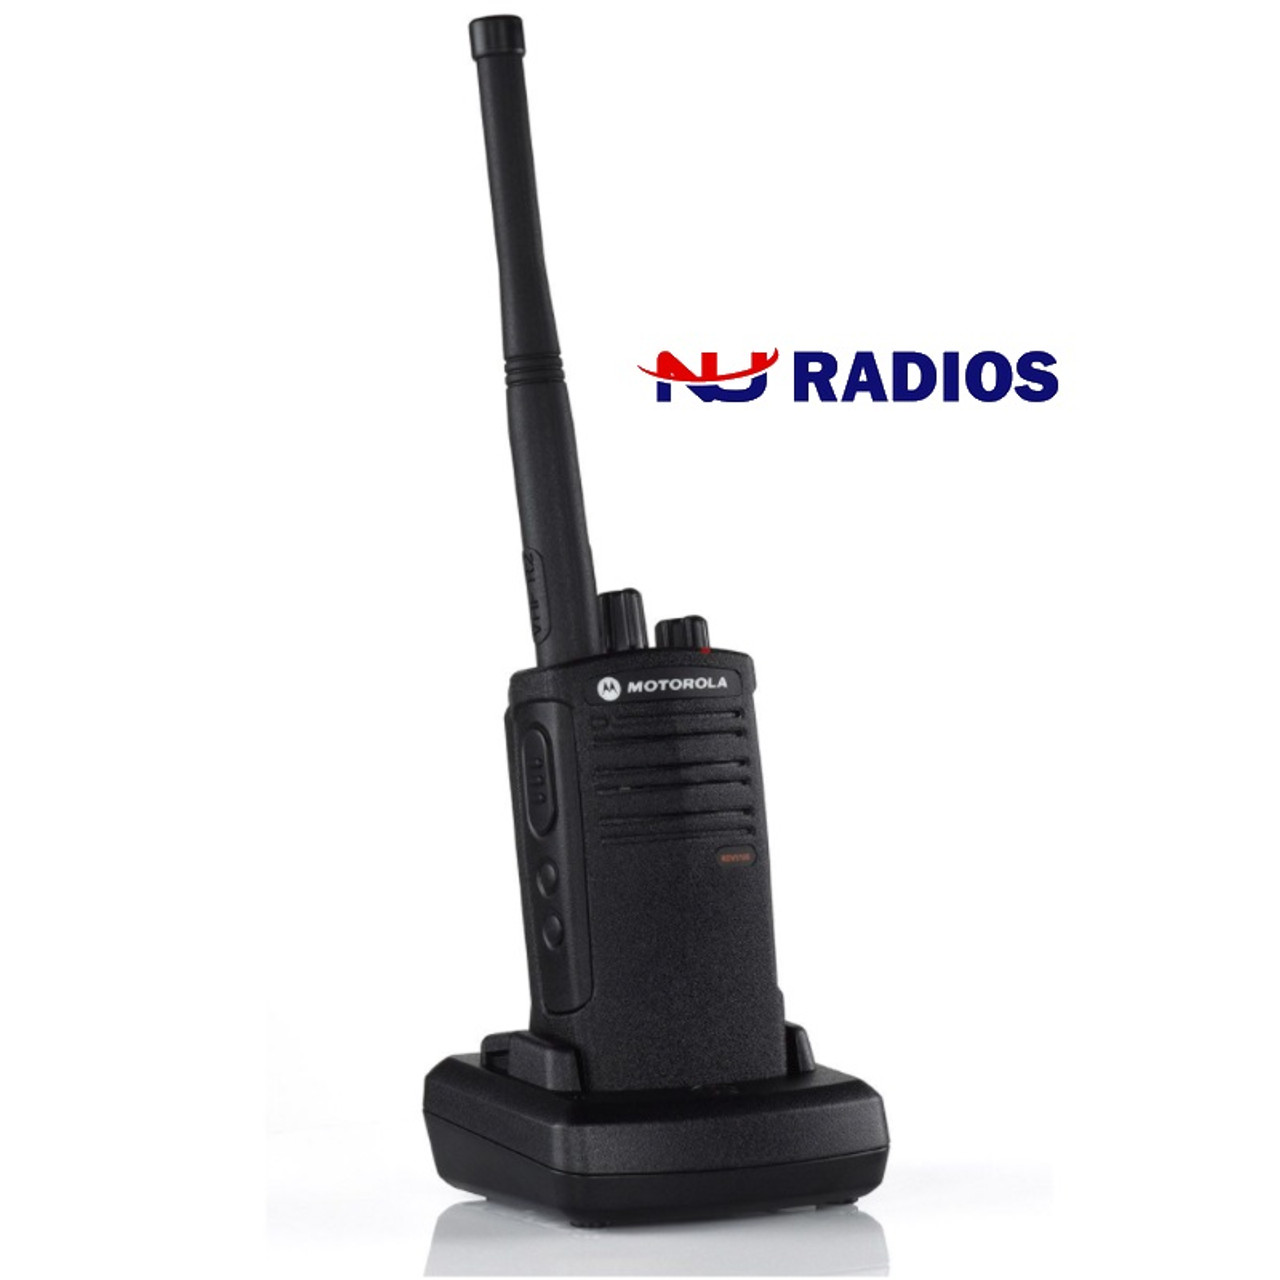 Motorola RDV5100 Six Pack of Watt Business 2-Way VHF Radios is just what  you need. This radios is a workhorse and gets the job done. Perfect for  construction sites, farms, large